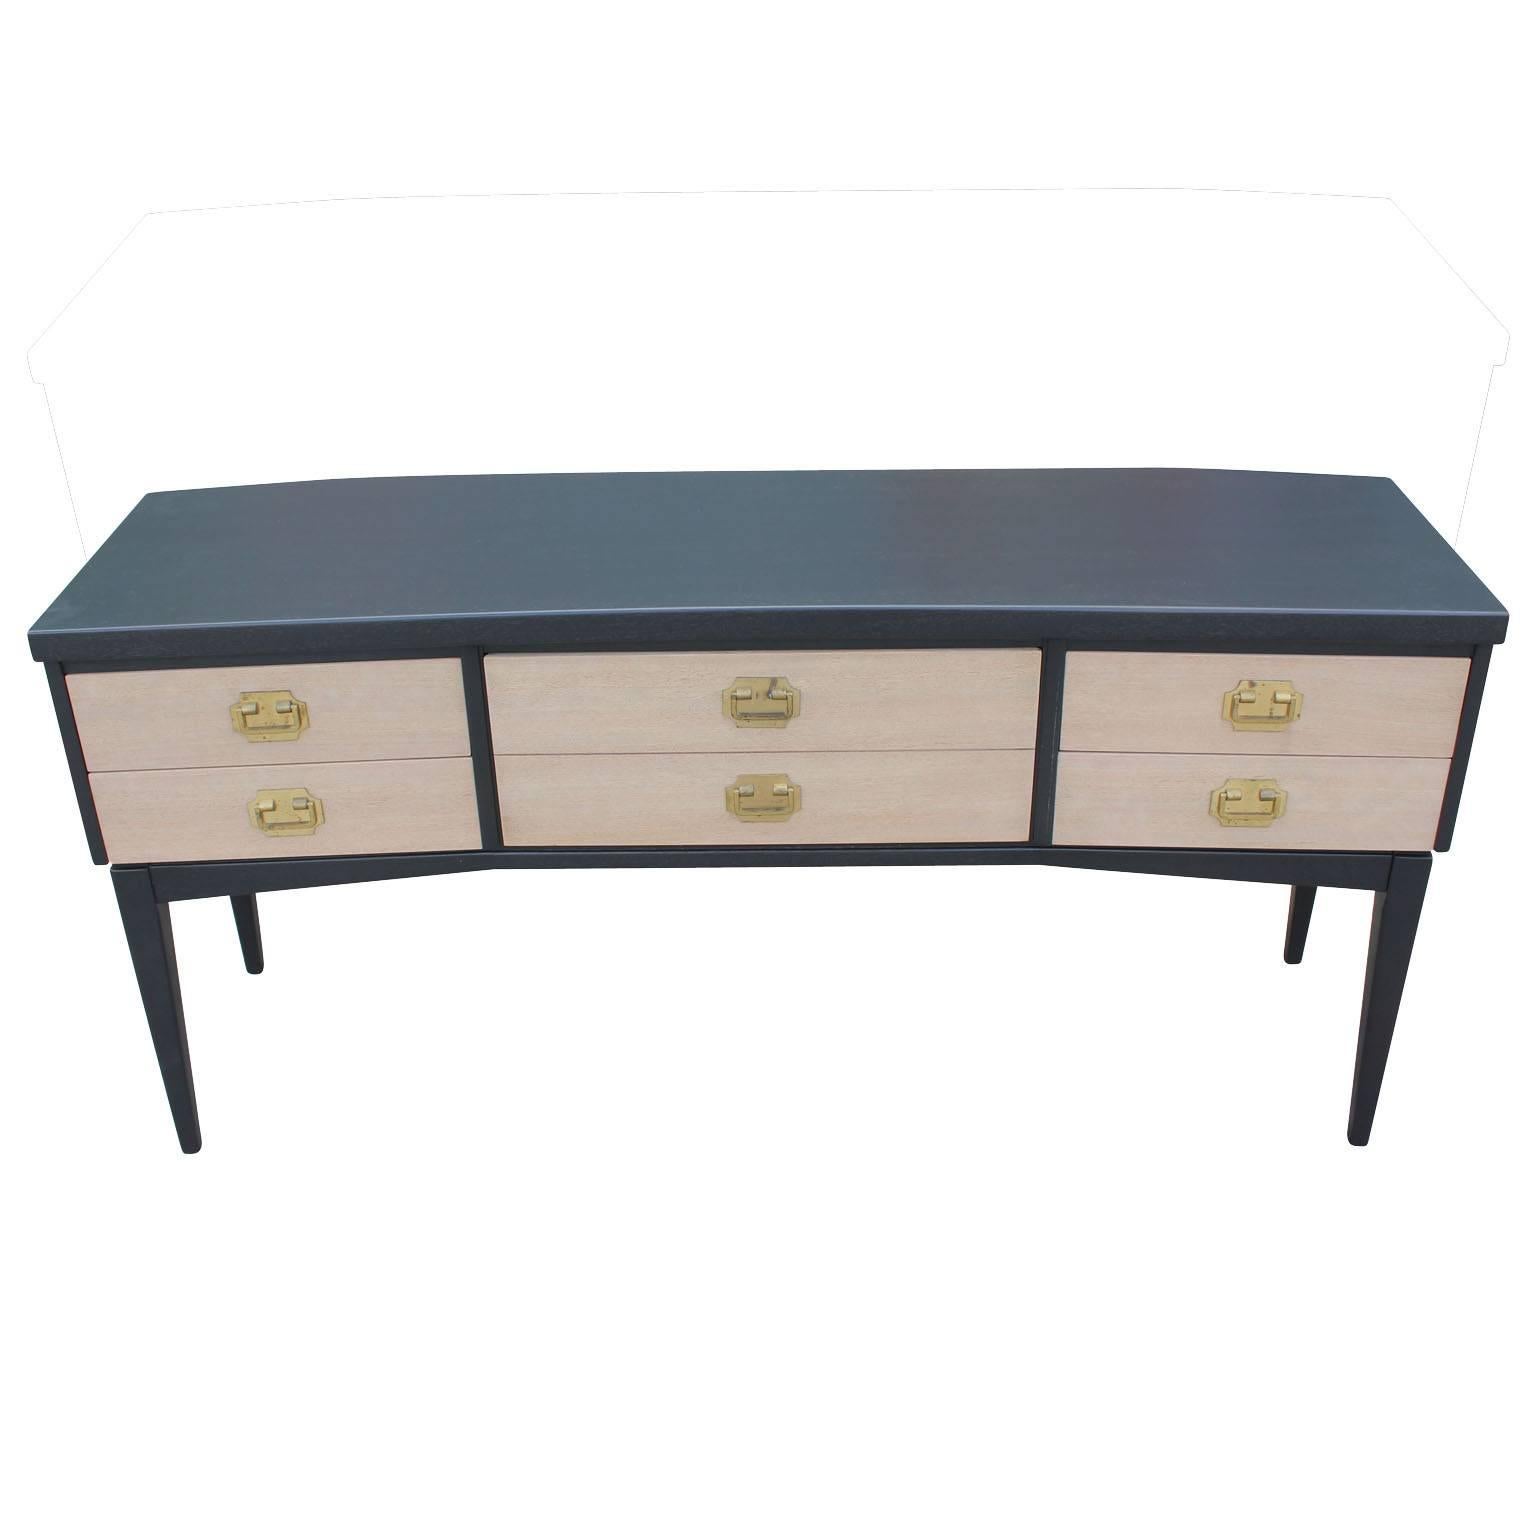 Beautiful two-toned sideboard / dresser/ Console with recently bleached and ebonized wood and outfitted with gorgeous brass hardware. This piece features five drawers; two small on the left and right, and a large drawer in the center. Would also